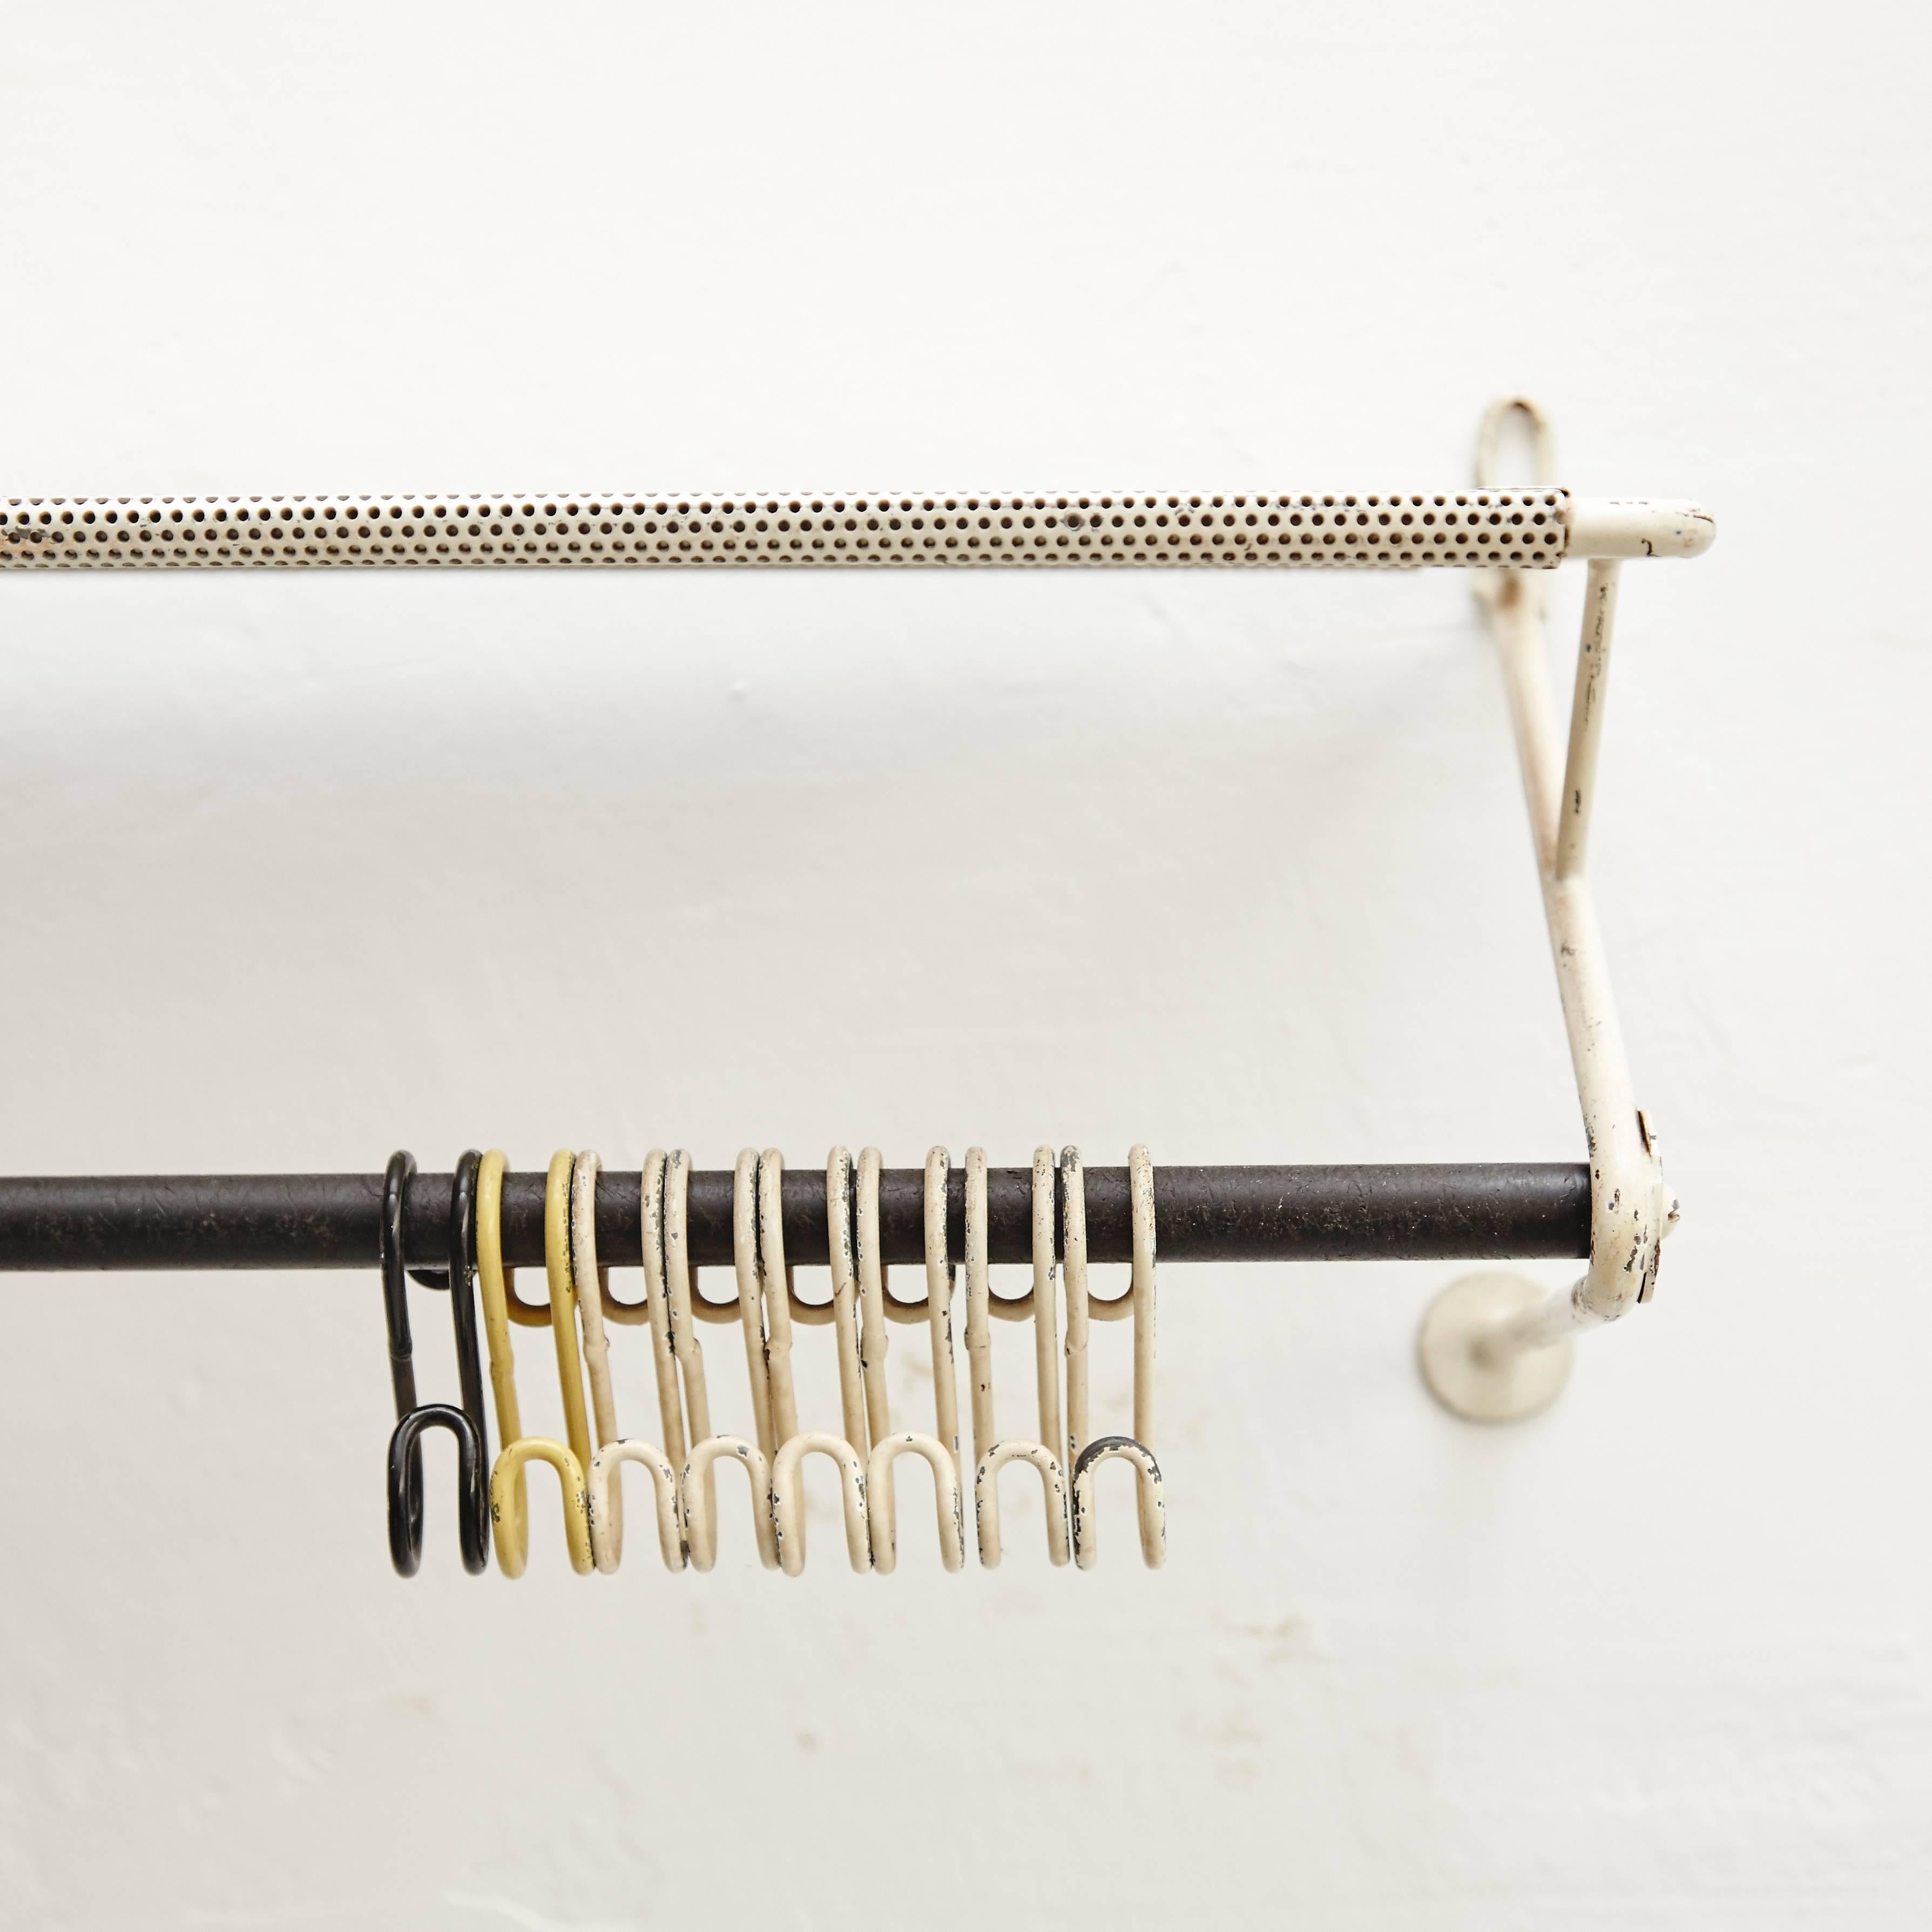 Coat rack designed by Mathieu Matégot.
Manufactured by Artimeta (Netherland), circa 1950.
Perforated, lacquered metal.

In good original condition, with minor wear consistent with age and use, preserving a beautiful patina.

Mathieu Matégot